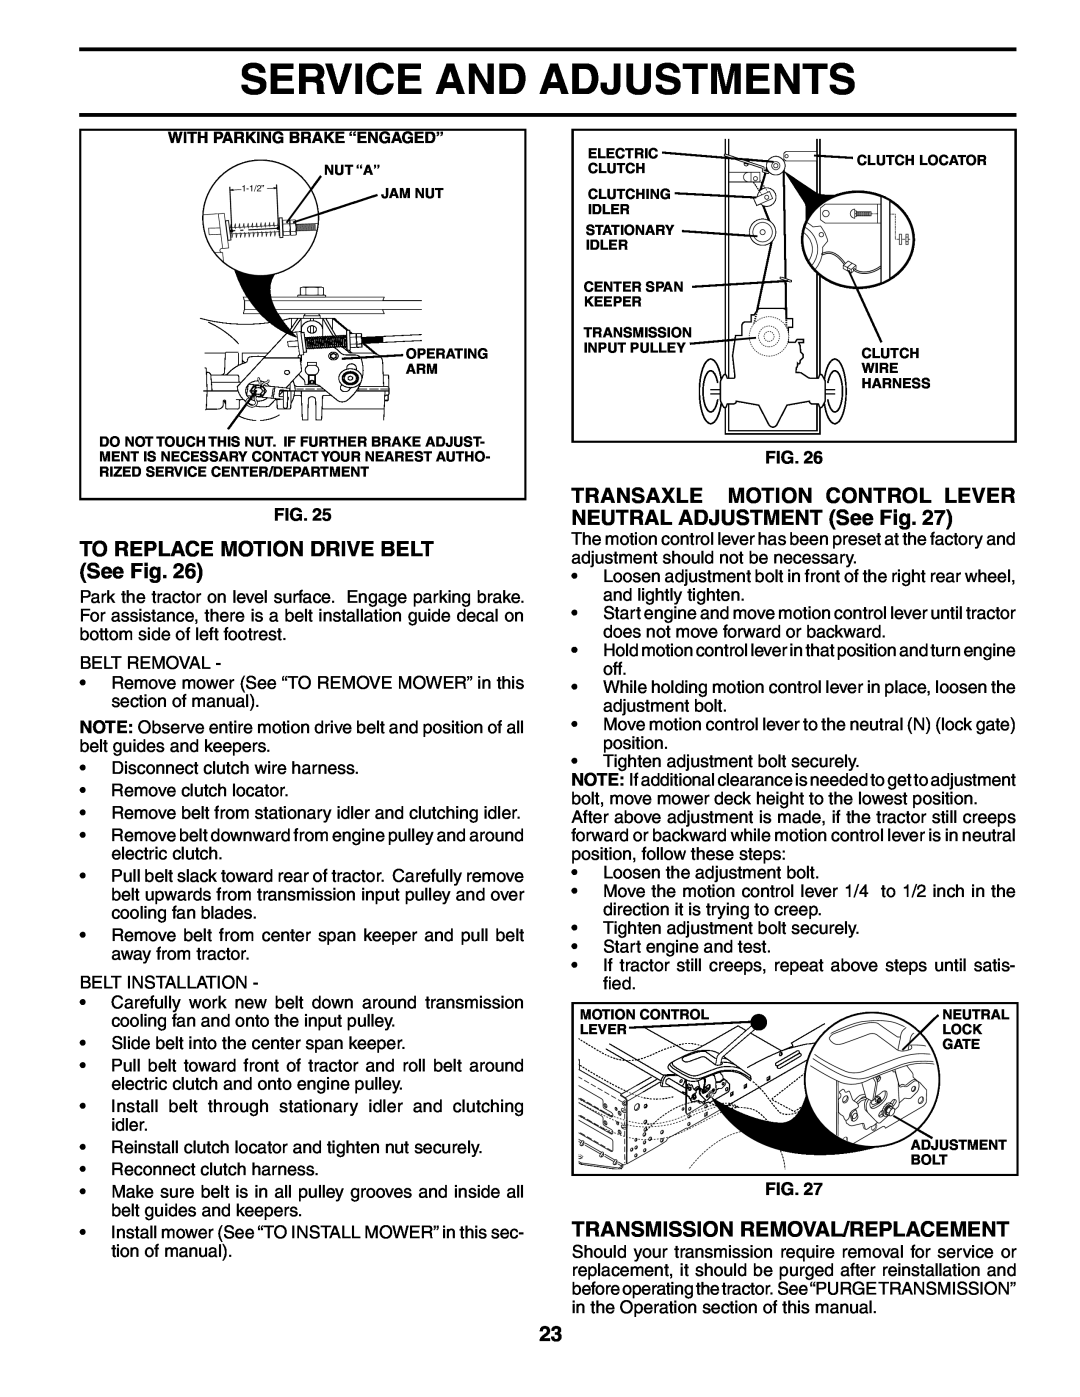 Poulan 184425, 954569455 TO REPLACE MOTION DRIVE BELT See Fig, TRANSAXLE MOTION CONTROL LEVER NEUTRAL ADJUSTMENT See Fig 